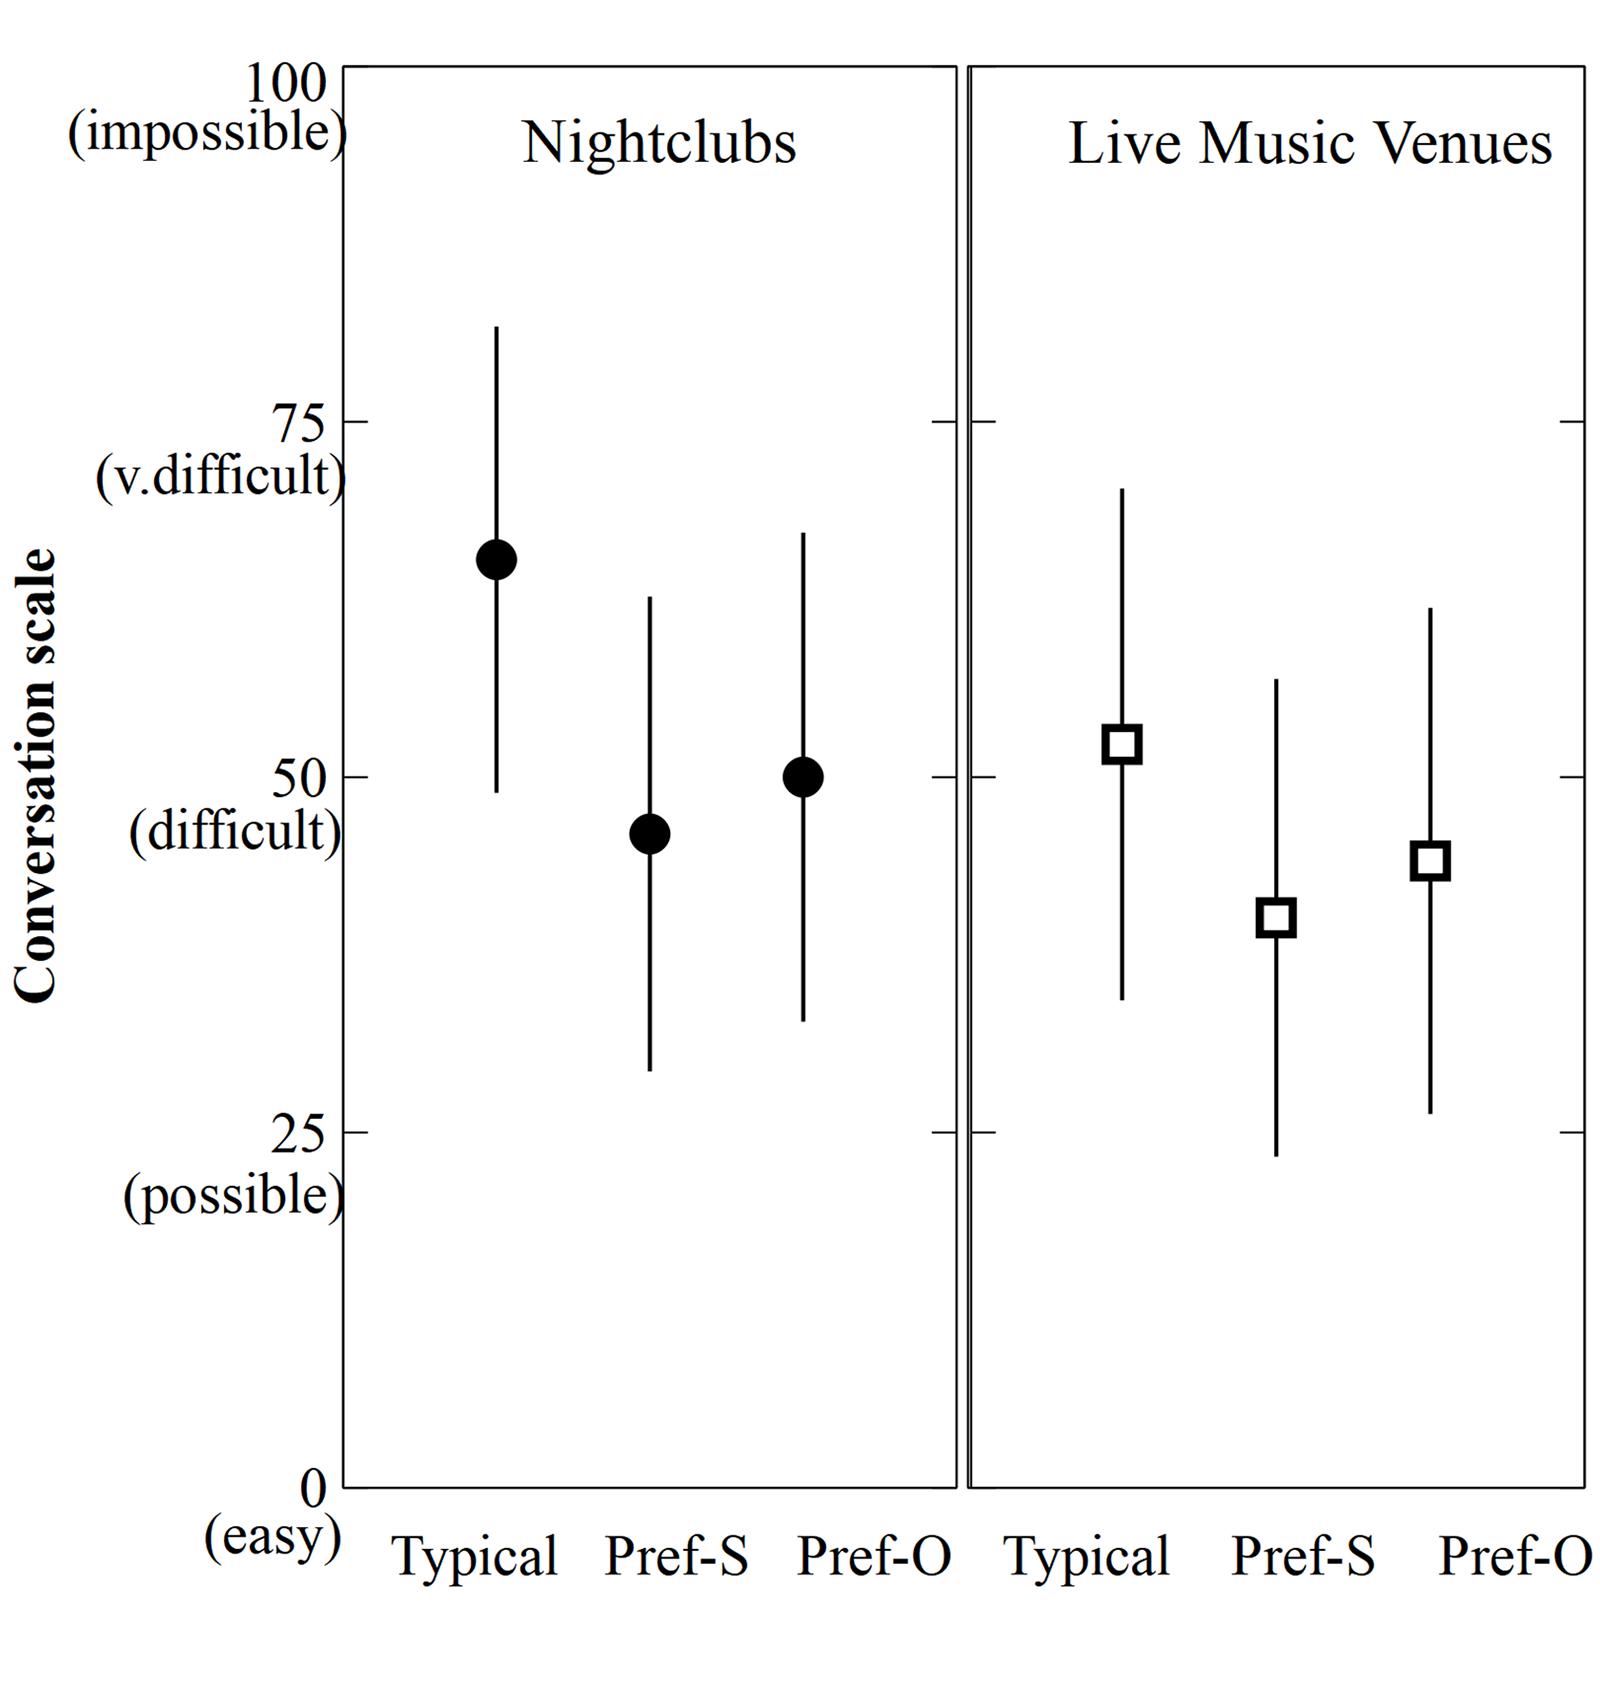 Frontiers - Time to Listen: Most Regular Patrons of Music Venues Prefer Lower Volumes - Psychology